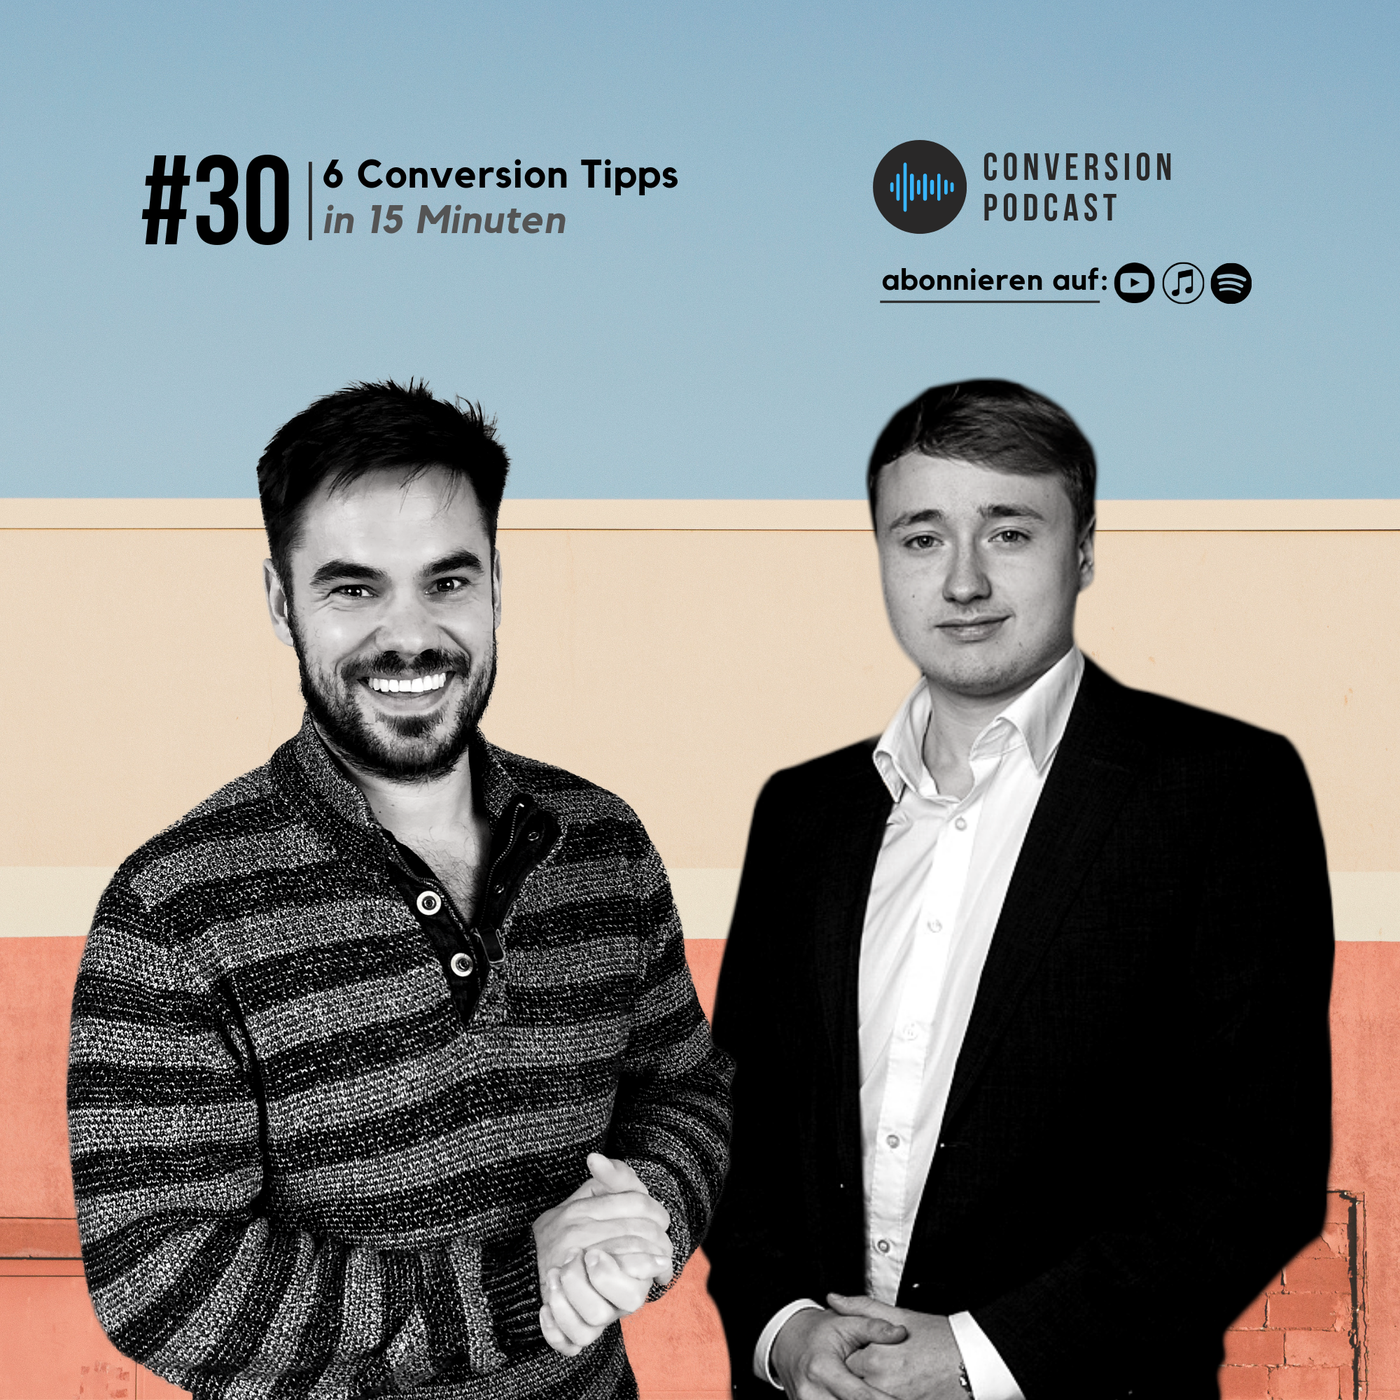 6 Conversion Tipps in 15 Minuten | #30 Conversion Podcast